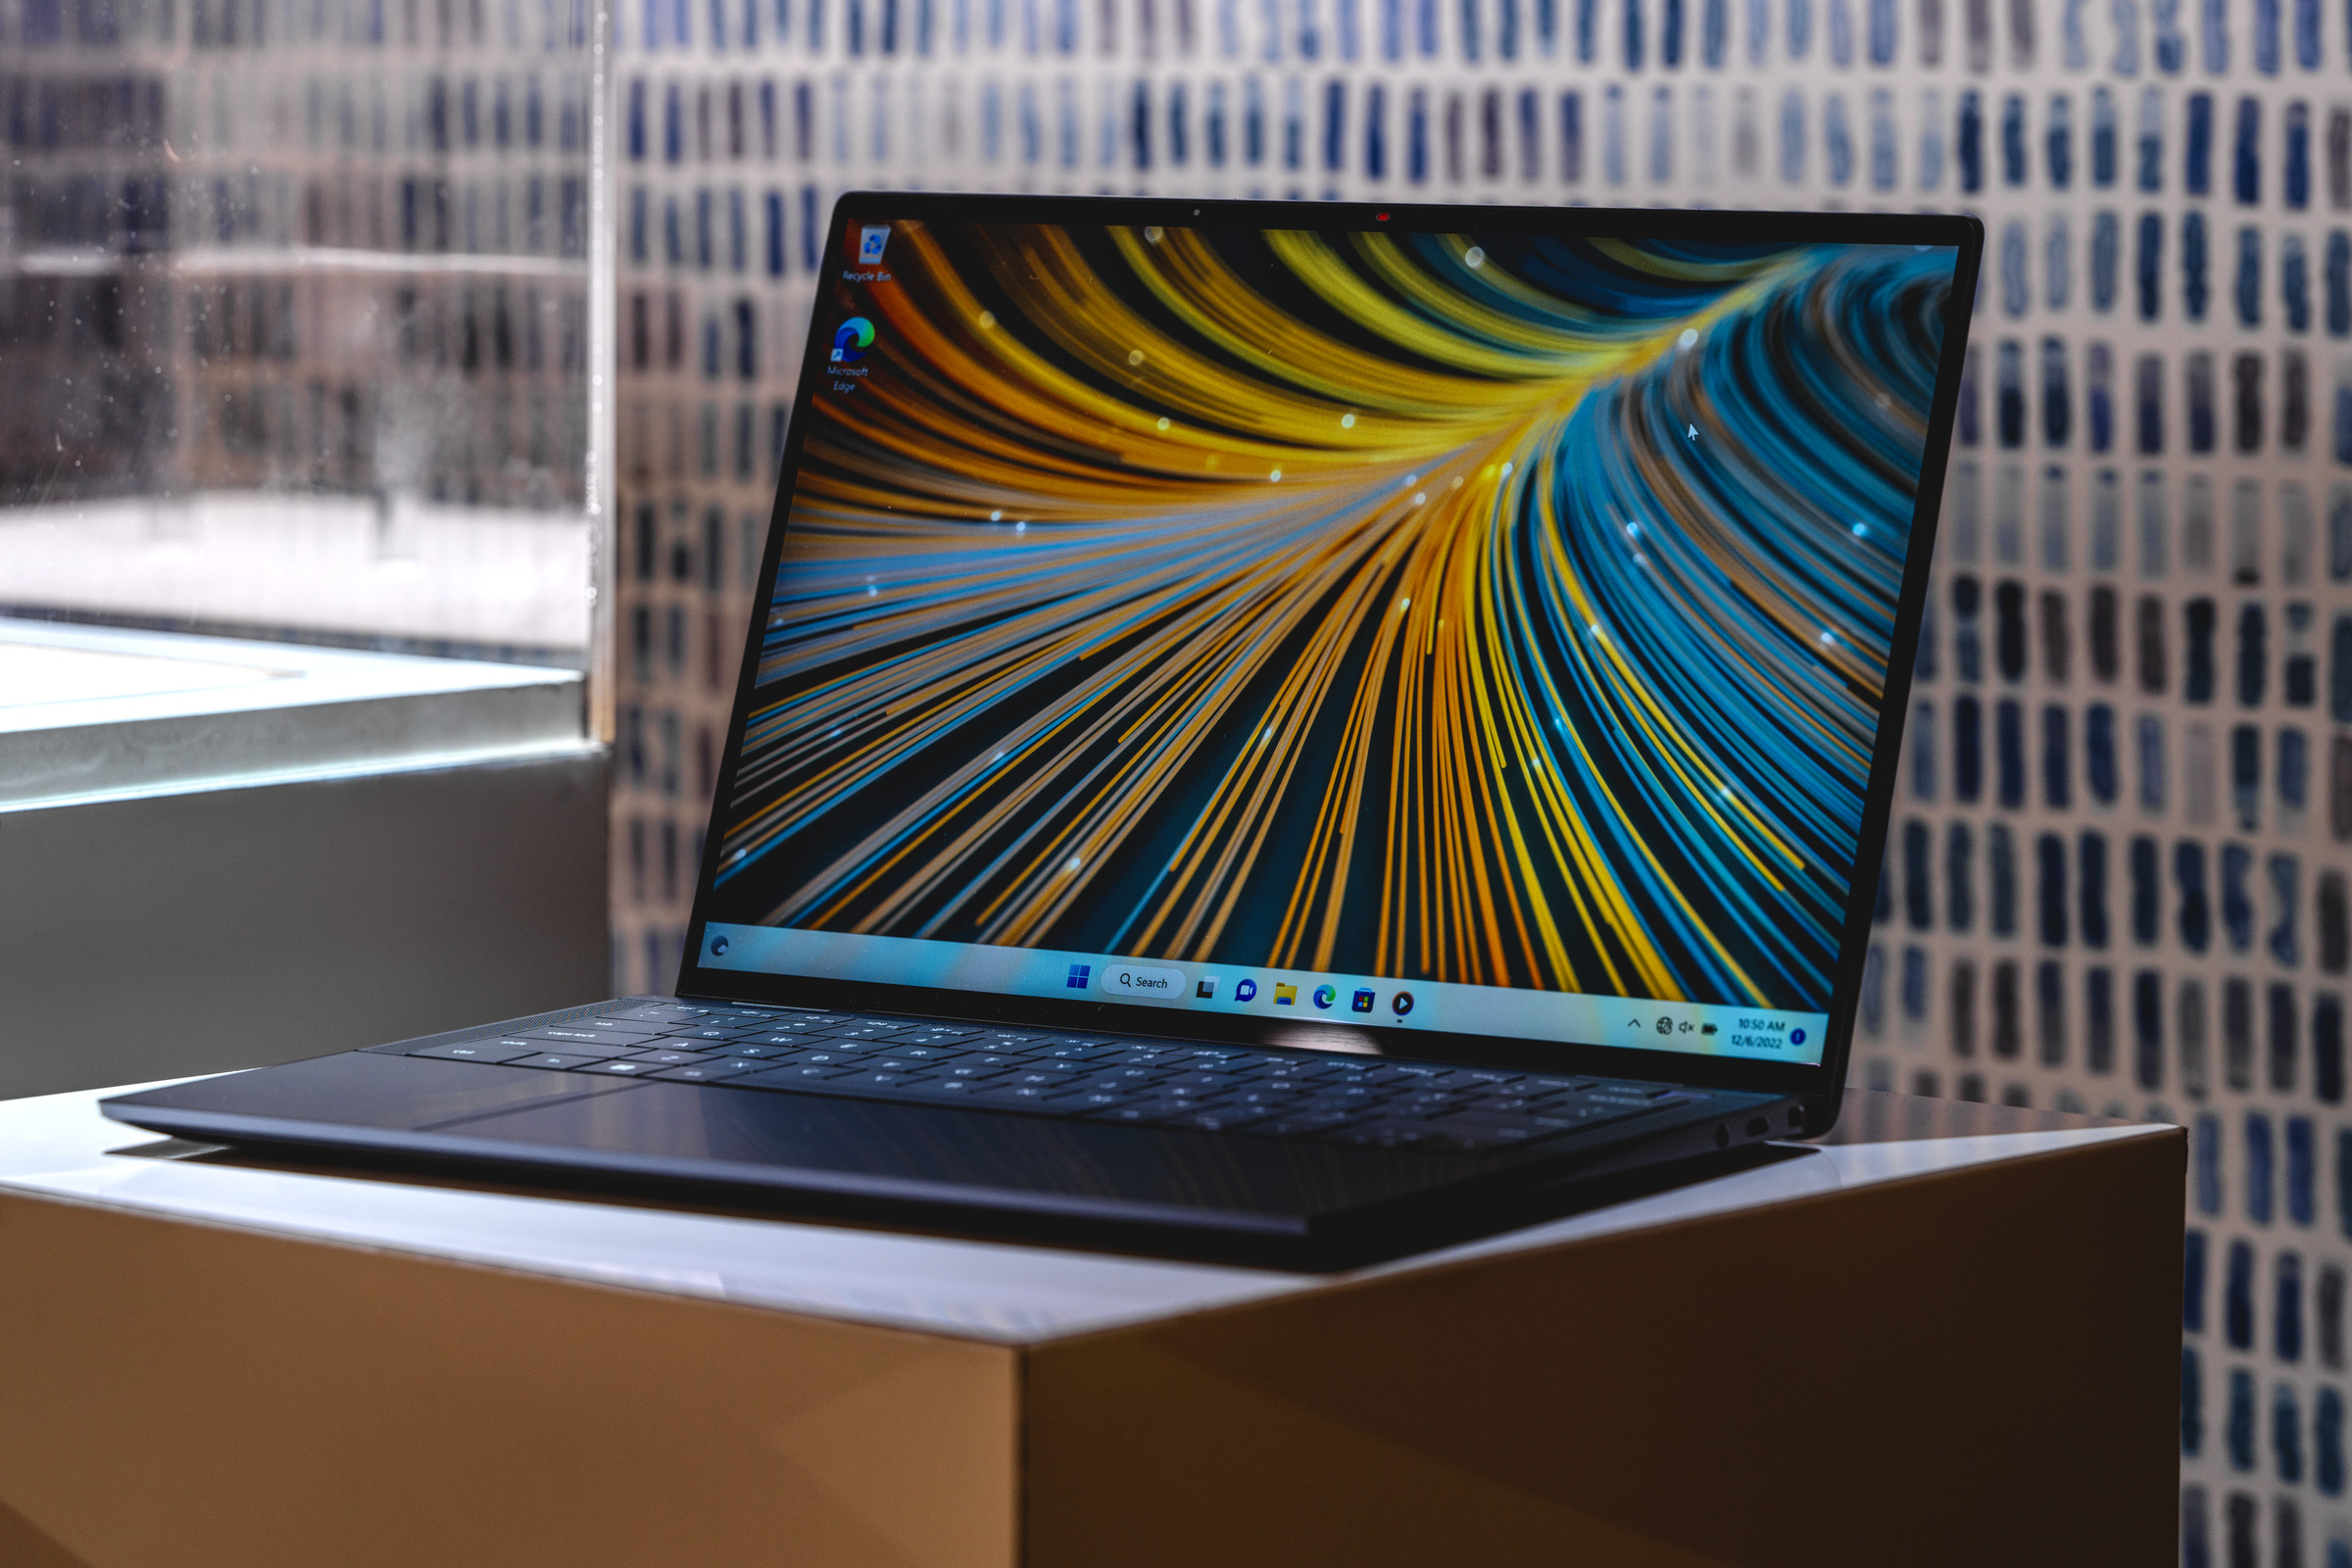 The Dell Latitude 9440 in front of a tiled background.